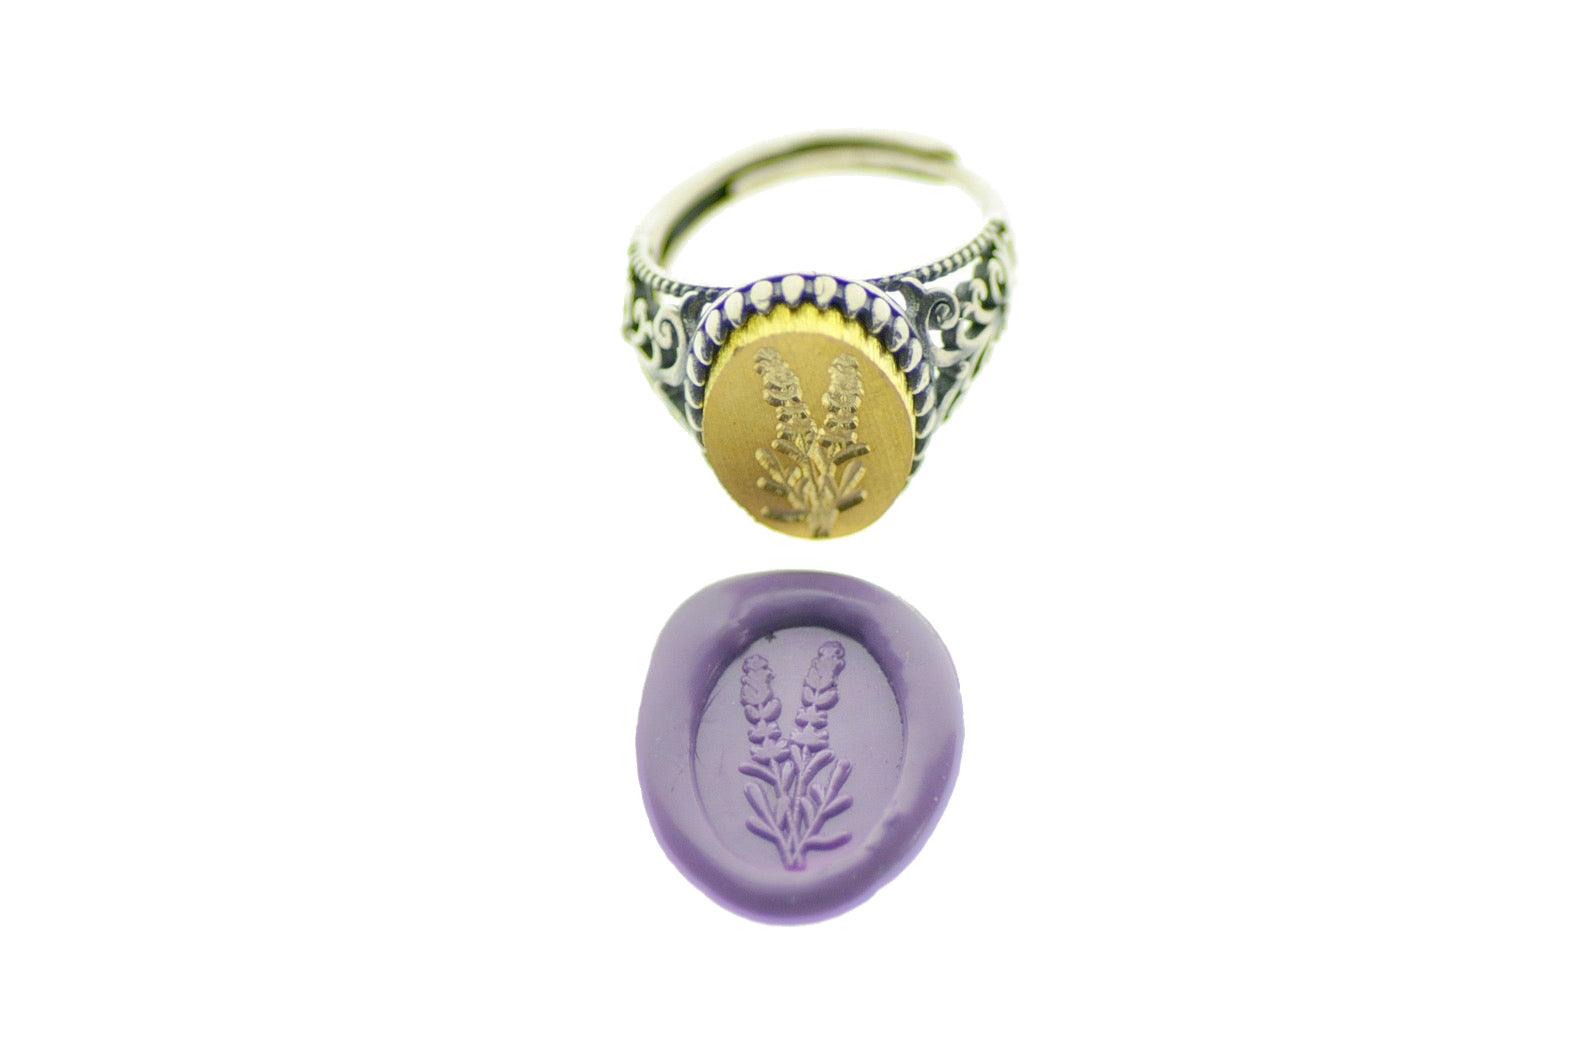 Lavender Signet Ring - Backtozero B20 - 1115f, 11x15mm, 11x15mm ring, accessory, Botanical, floral, Flower, jewelry, lavender, oval, oval ring, Plant, ring, signet ring, size 10, size 6, size 7, size 8, size 9, wax seal, wax seal ring, wax seal stamp